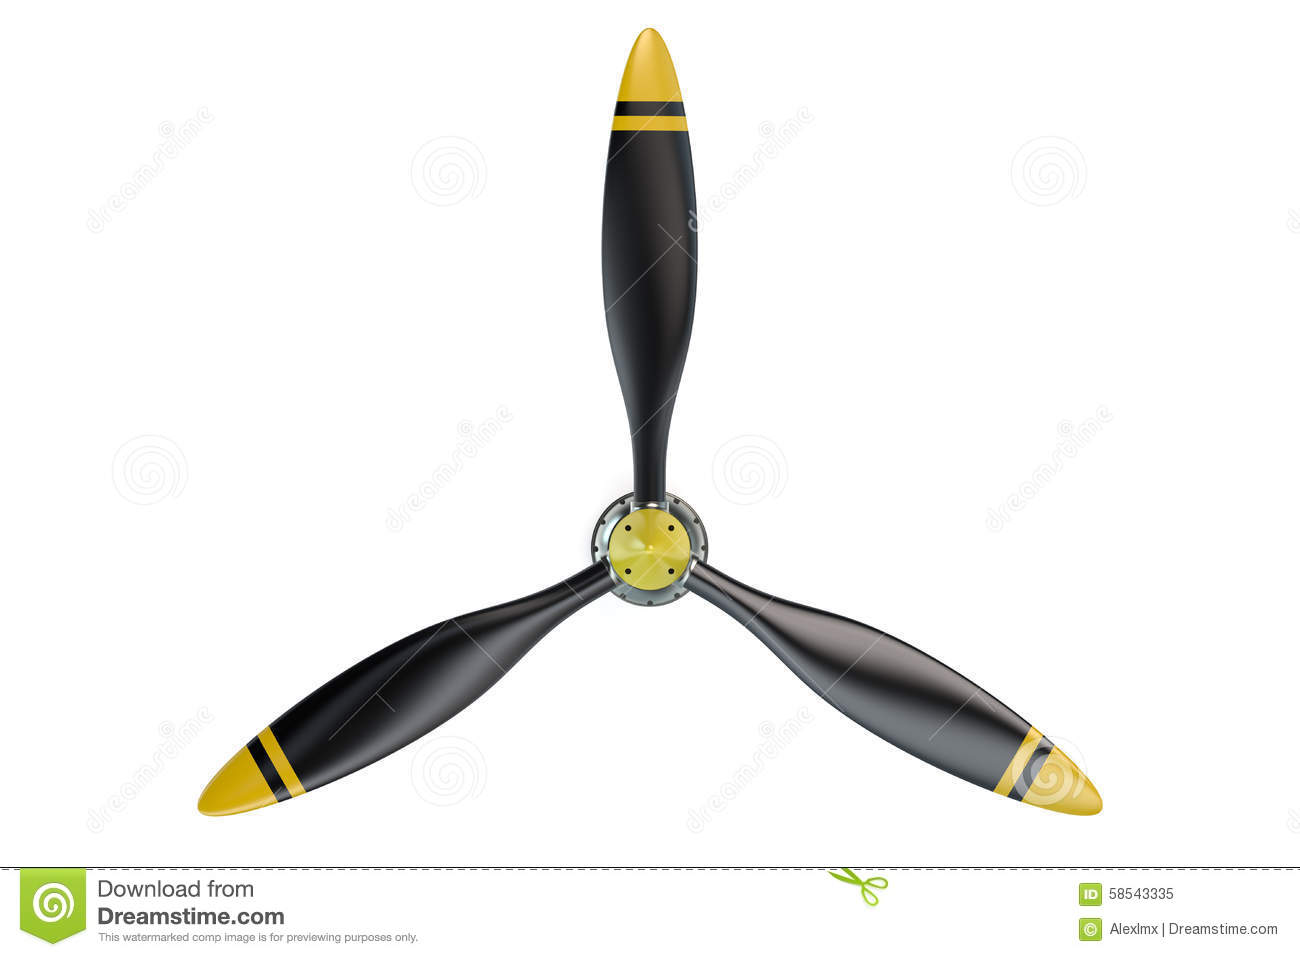 boat propeller clipart - photo #48